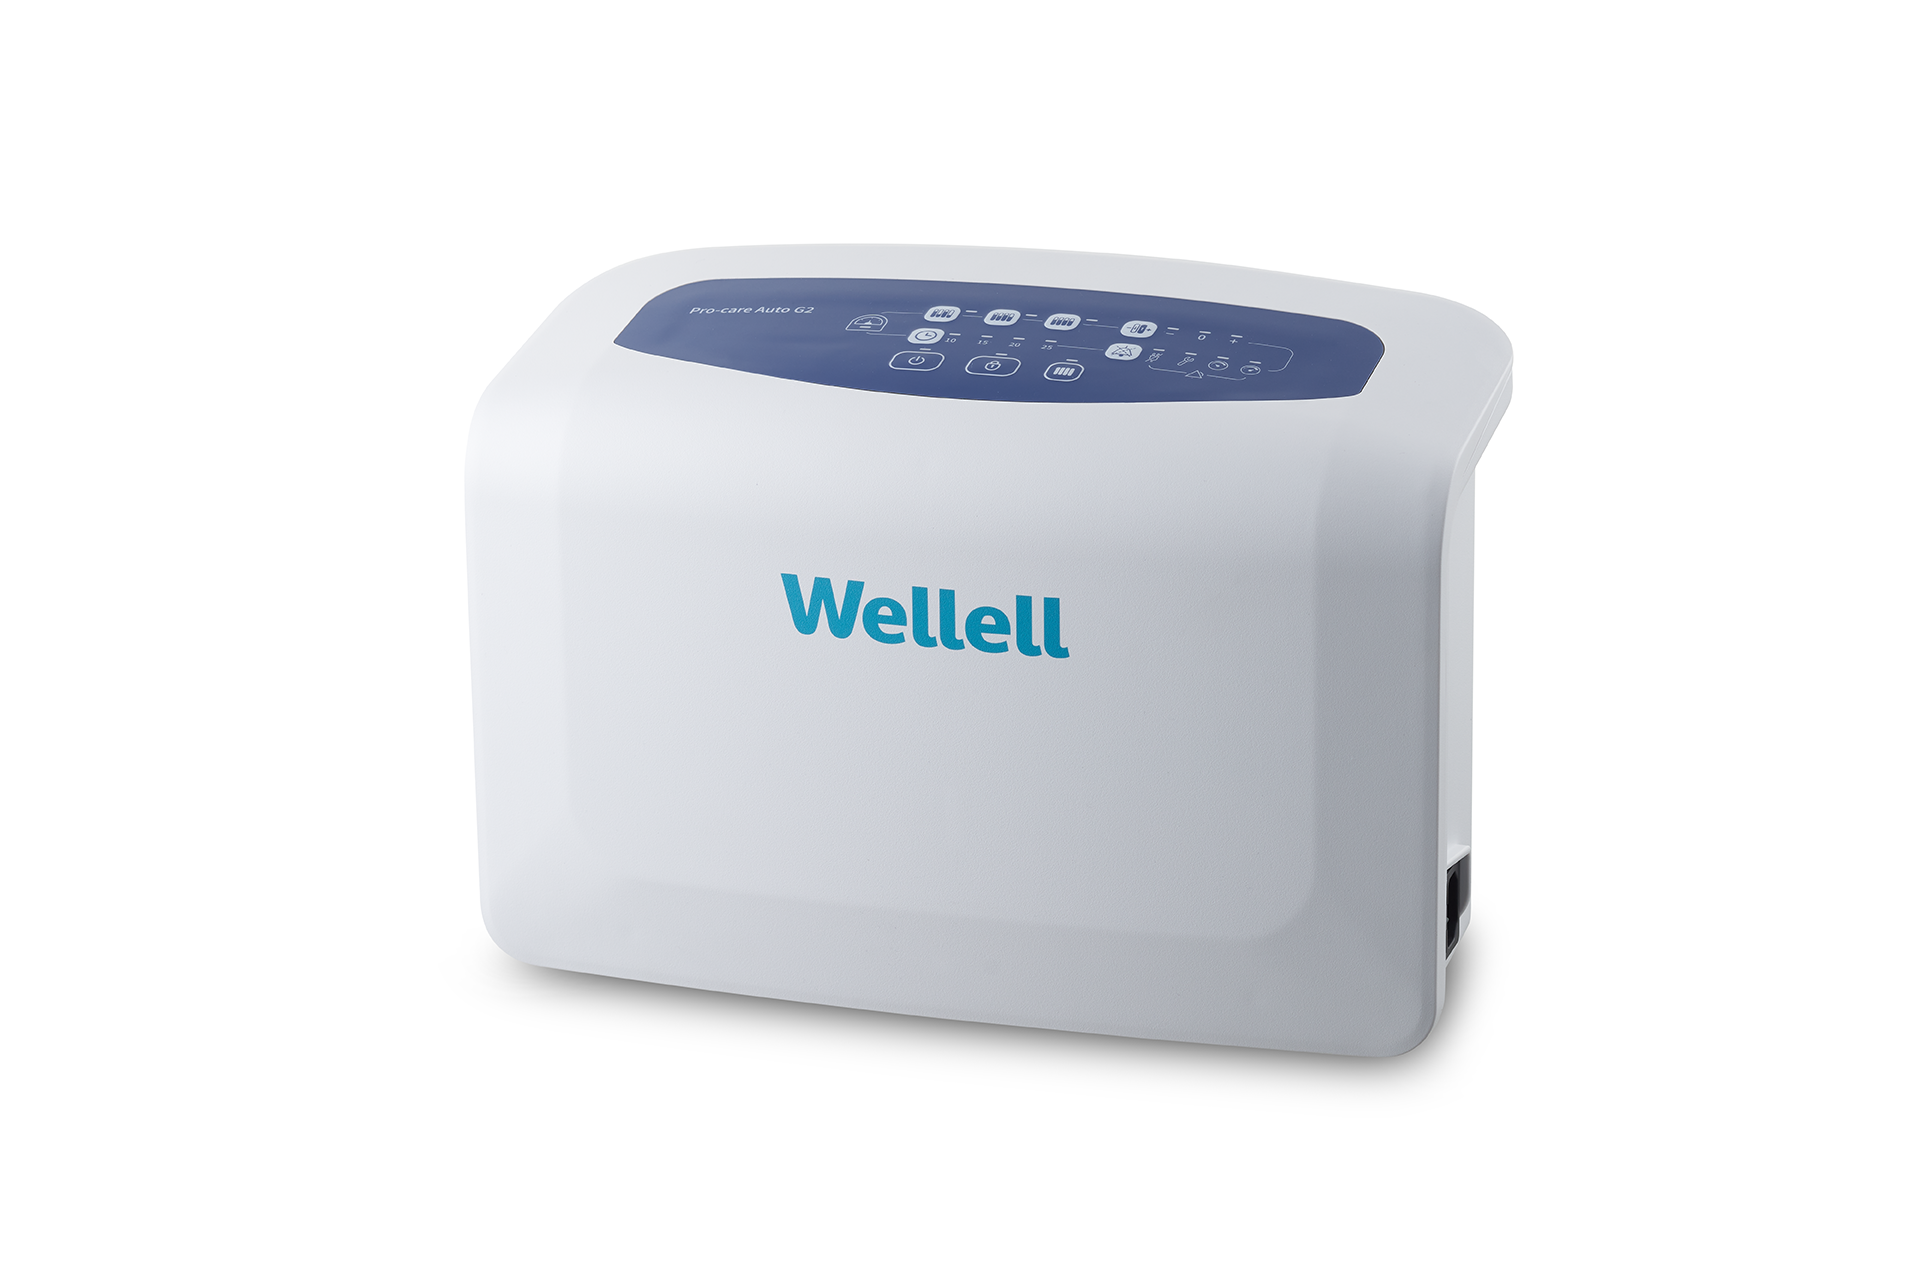 Pro-care Auto - Intuitive pump interface gives easy access to control pressure settings, times, and alarms -Wellell